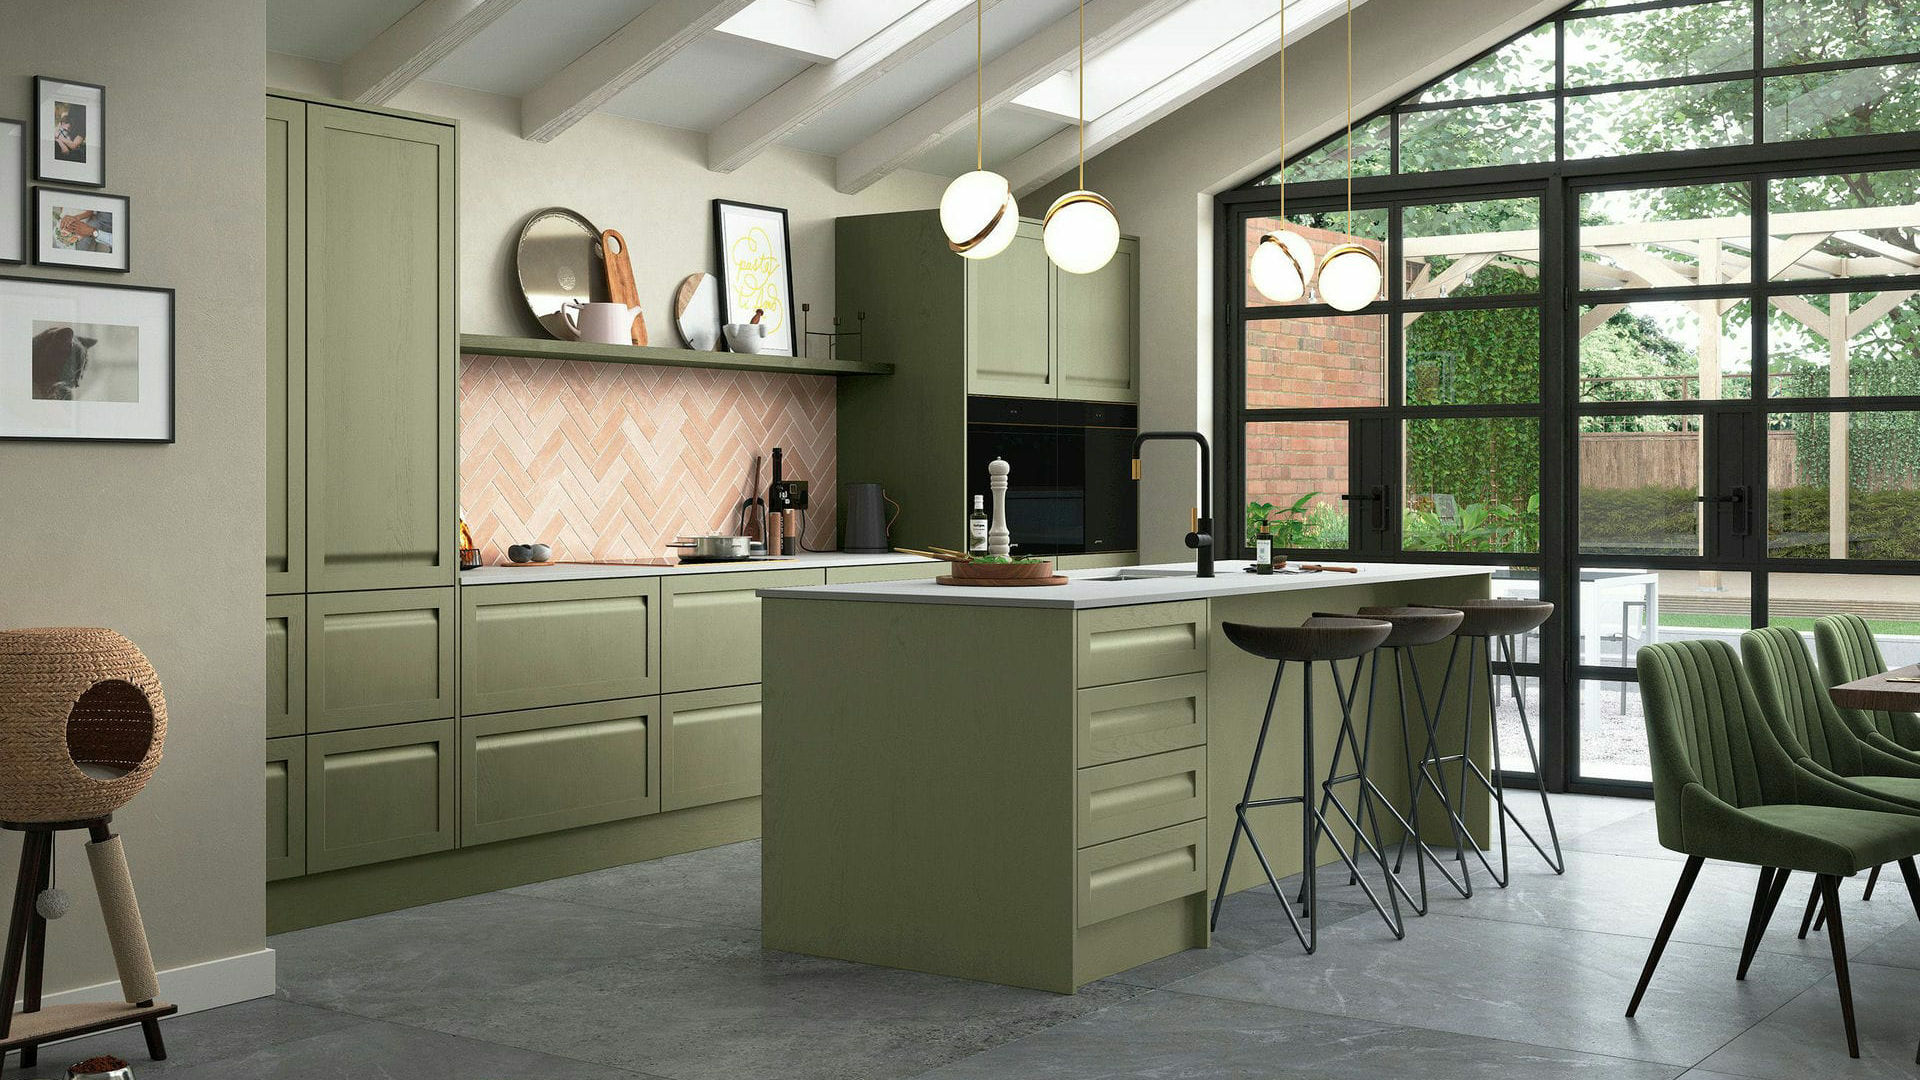 Handleless Solid Wood Cardamom kitchens blending the warmth of wood with the exotic spice of cardamom green